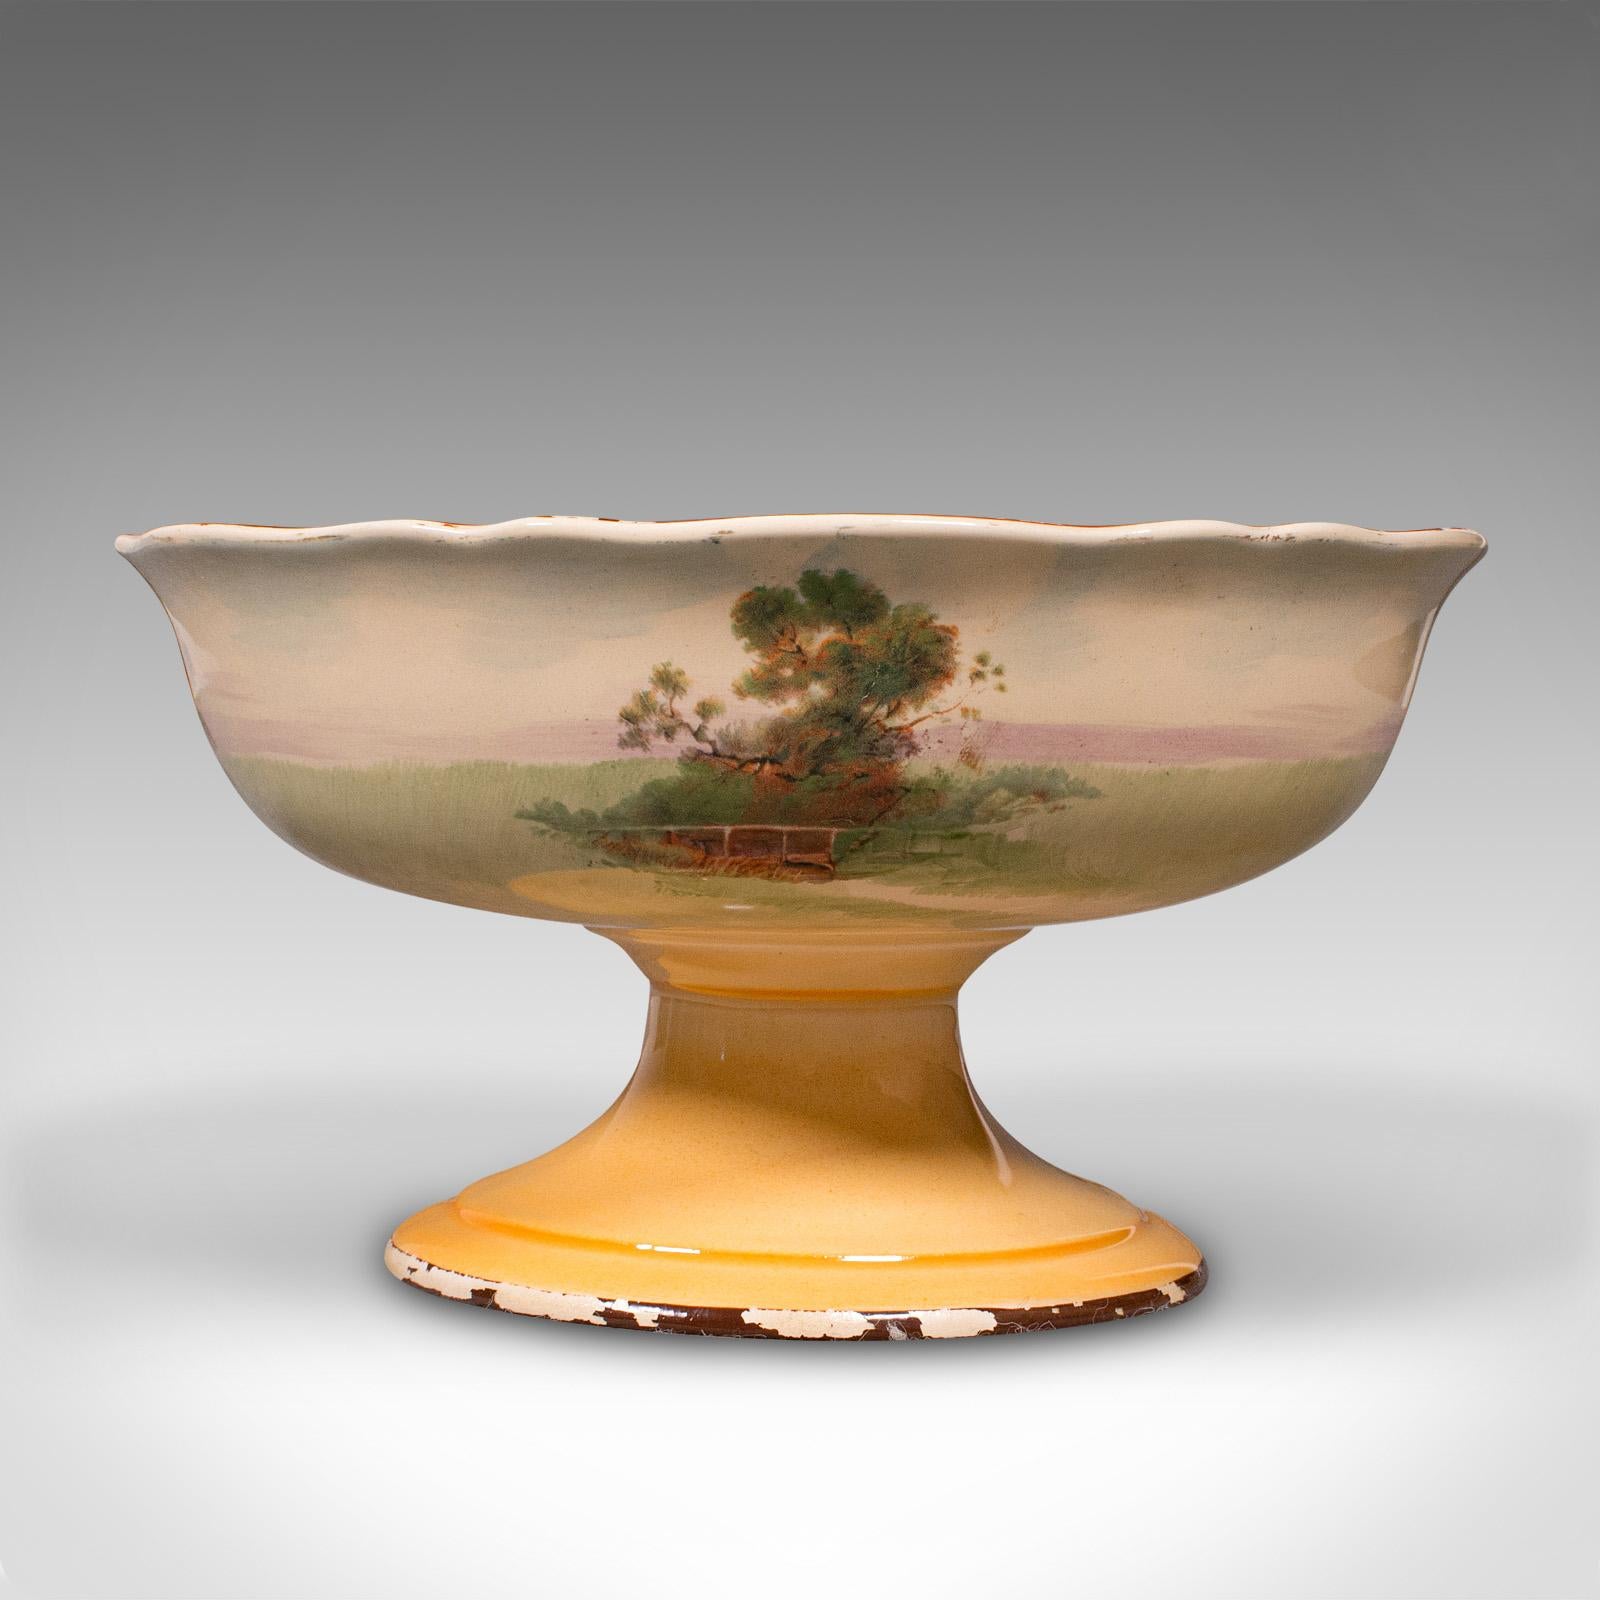 20th Century Vintage Decorative Footed Bowl, English, Ceramic, Serving Dish, Fruitbowl, 1930 For Sale